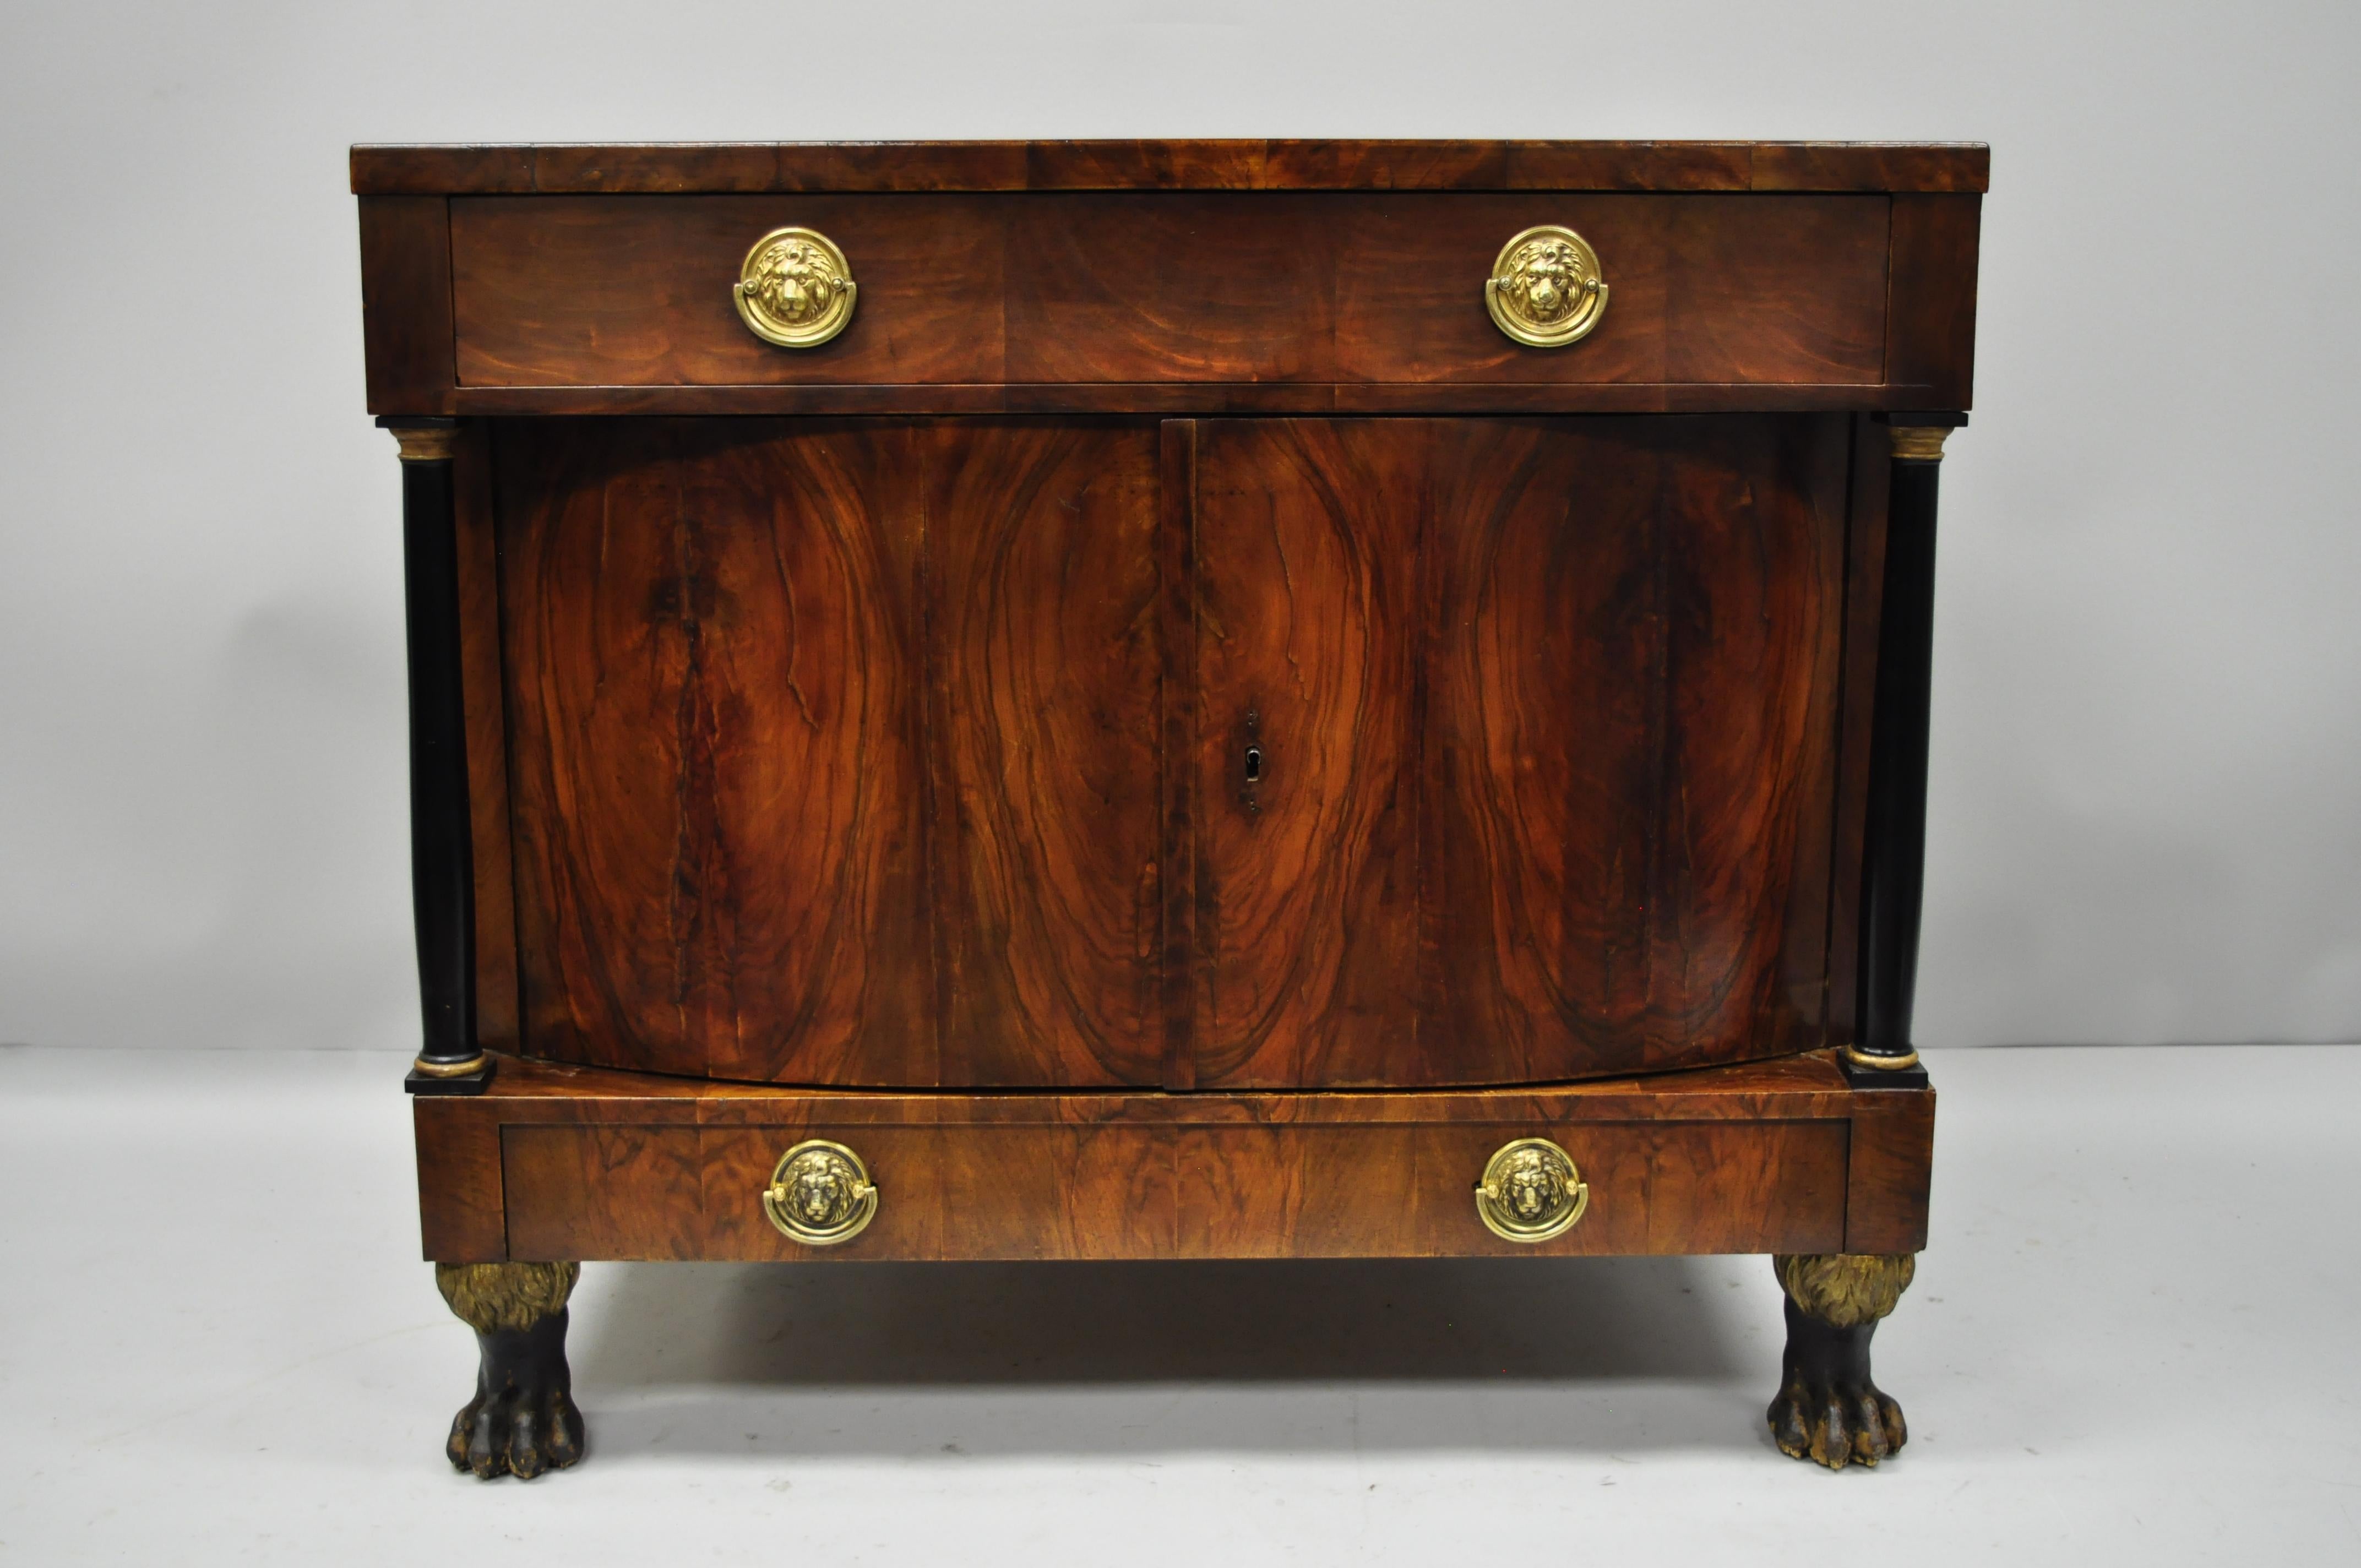 19th century American Empire lion claw foot crotch mahogany cabinet. Item features hairy claw feet, black column supports with gold accents, bow front cabinet doors, faux lower drawer, single dovetailed drawer, professionally refinished at some